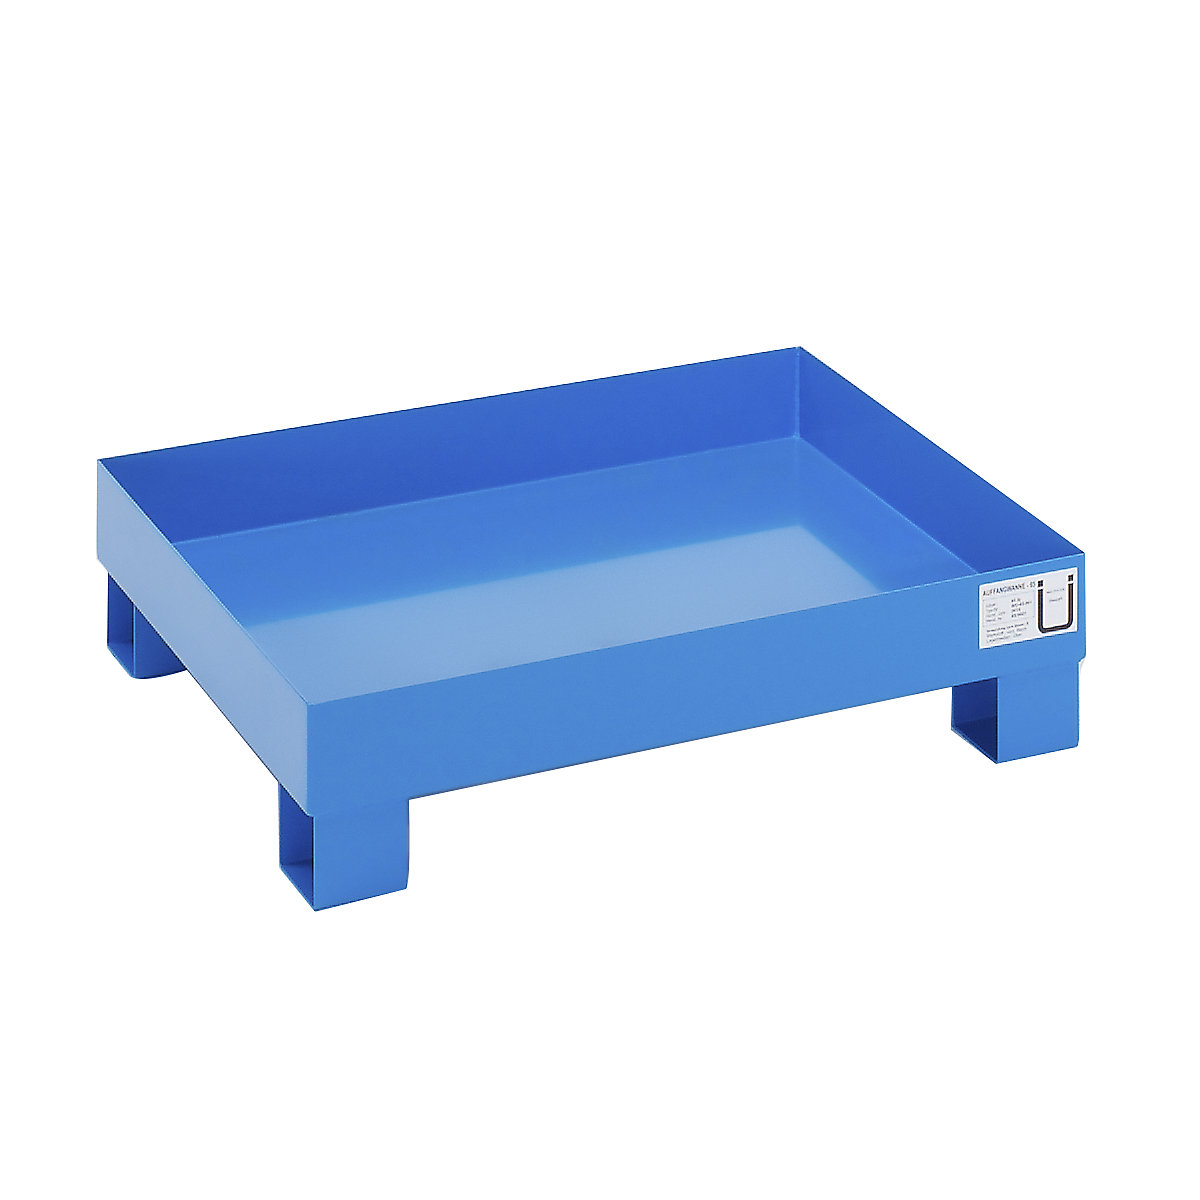 Sump tray for 60 l – eurokraft basic, LxWxH 800 x 900 x 220 mm, with certification, powder coated blue, without grate-3